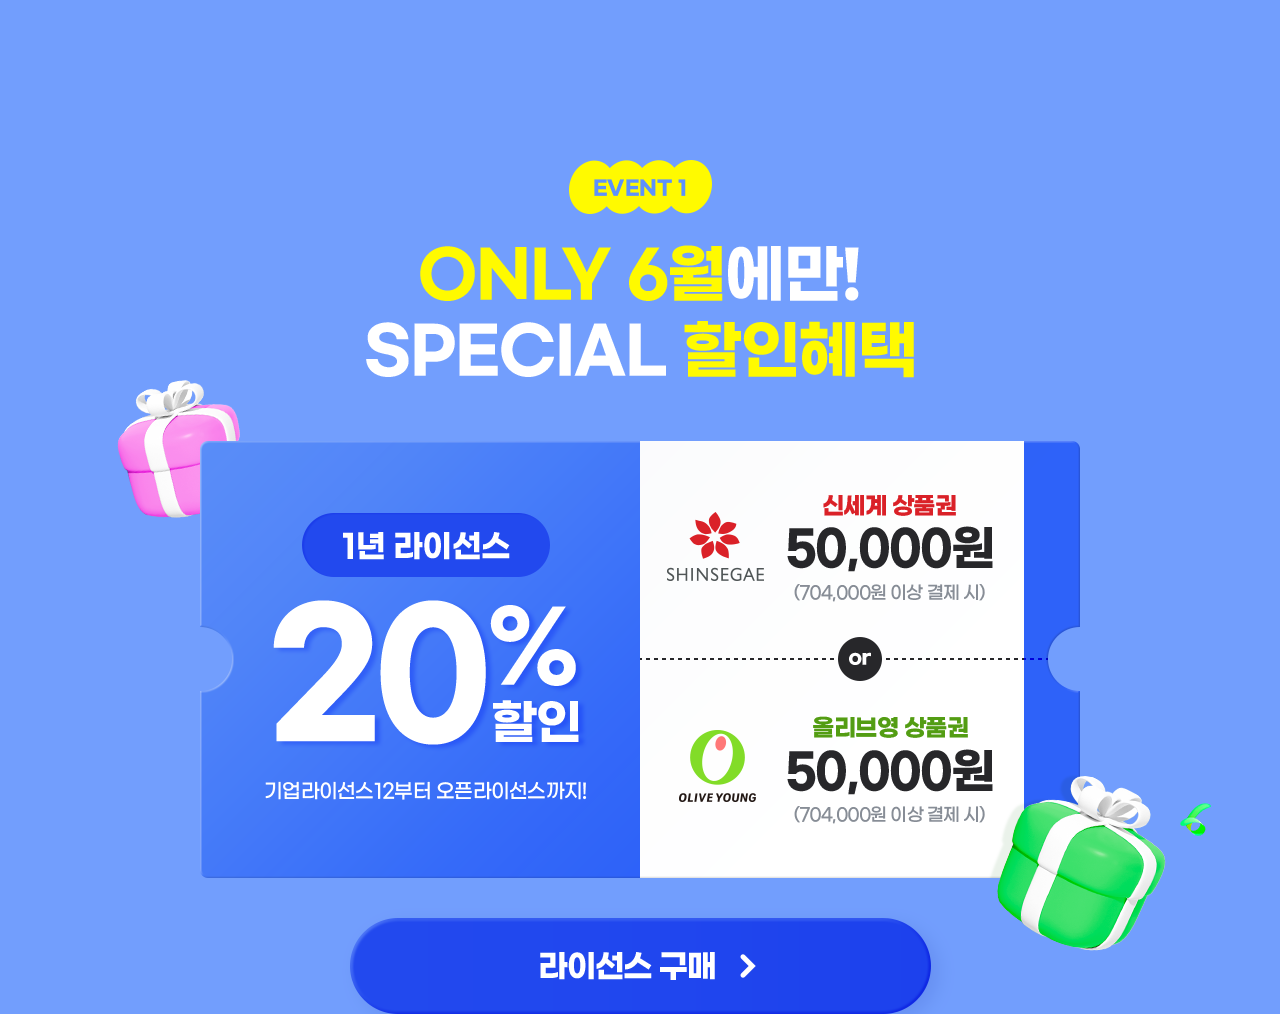 only 6월에만! special 할인혜택